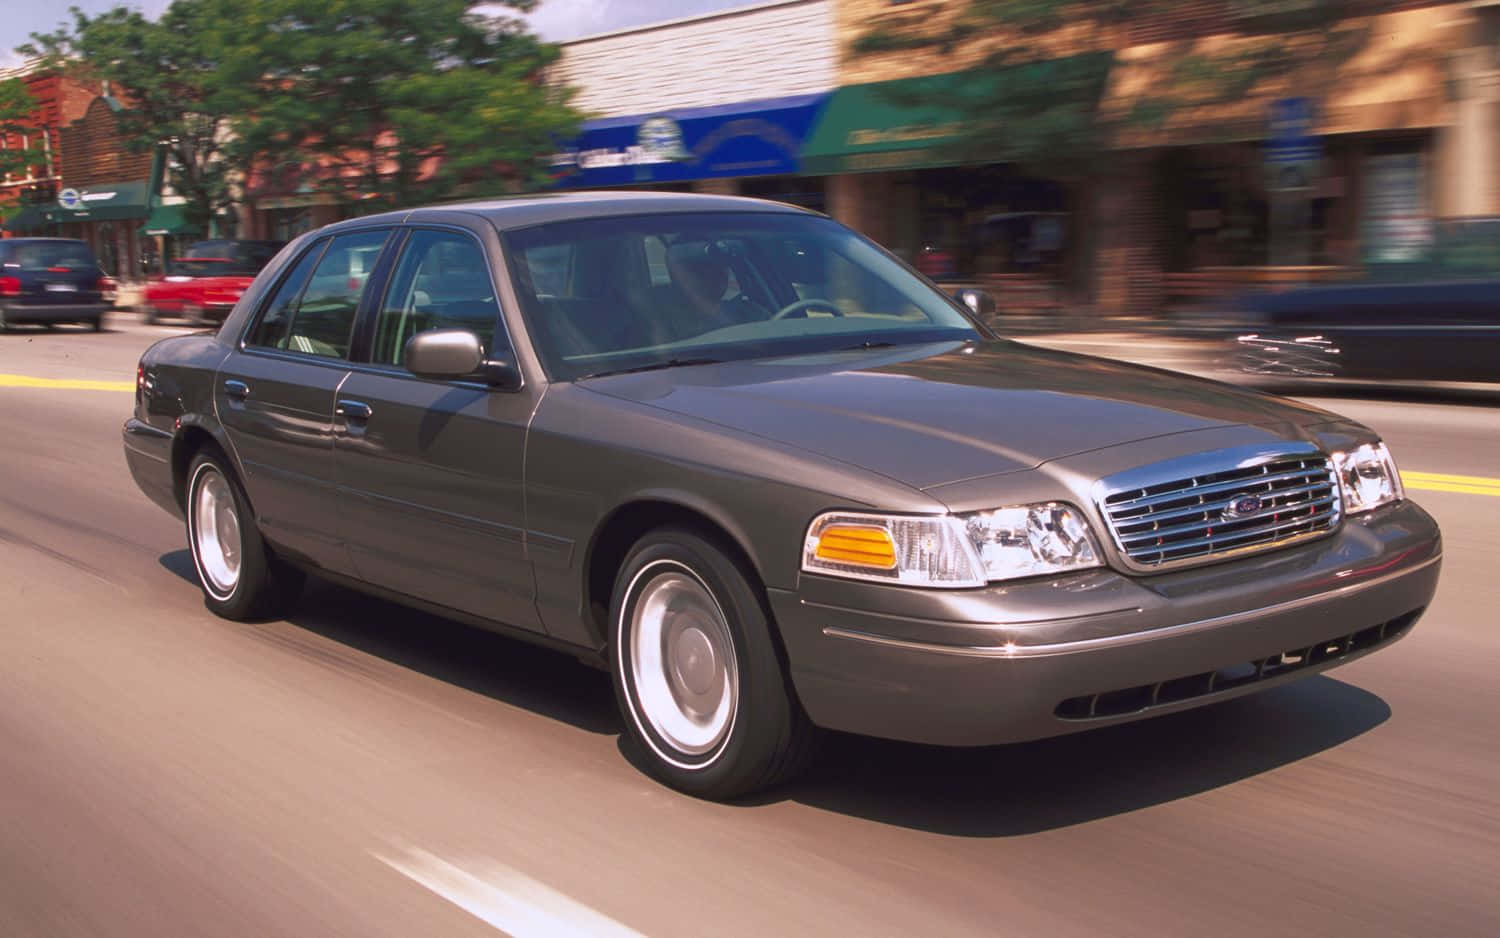 Powerful Ford Crown Victoria cruising on the road Wallpaper